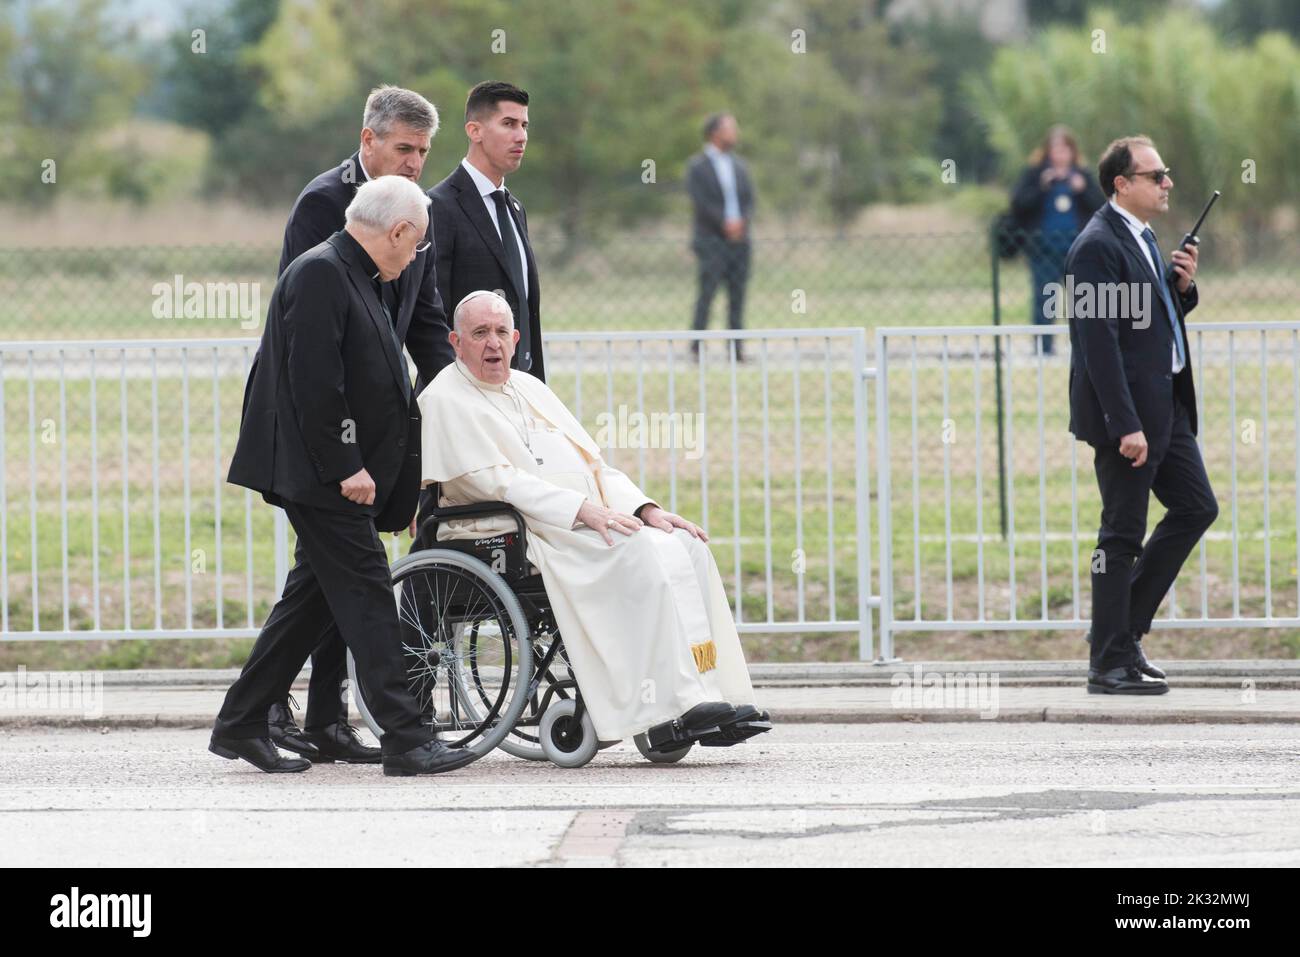 Italy, Assisi, Vatican, 22/09/24 Pope Francis, escorted by his aide Sandro Mariotti (Rear C), Vatican Security Chief, Gianluca Gauzzi Broccoletti (L) and Prefect of the Pontifical House, Monsignor Leonardo Sapienza (2ndL) arrives in a wheelchair after his helicopter landed in Assisi, central Italy, to attend the Economy of Francesco (EoF) event EoF is a process called for by the Pope to lay foundations for a new economy. Photograph by Andrea Colarieti /Catholic Press Photo. RESTRICTED TO EDITORIAL USE - NO MARKETING - NO ADVERTISING CAMPAIGNS Stock Photo